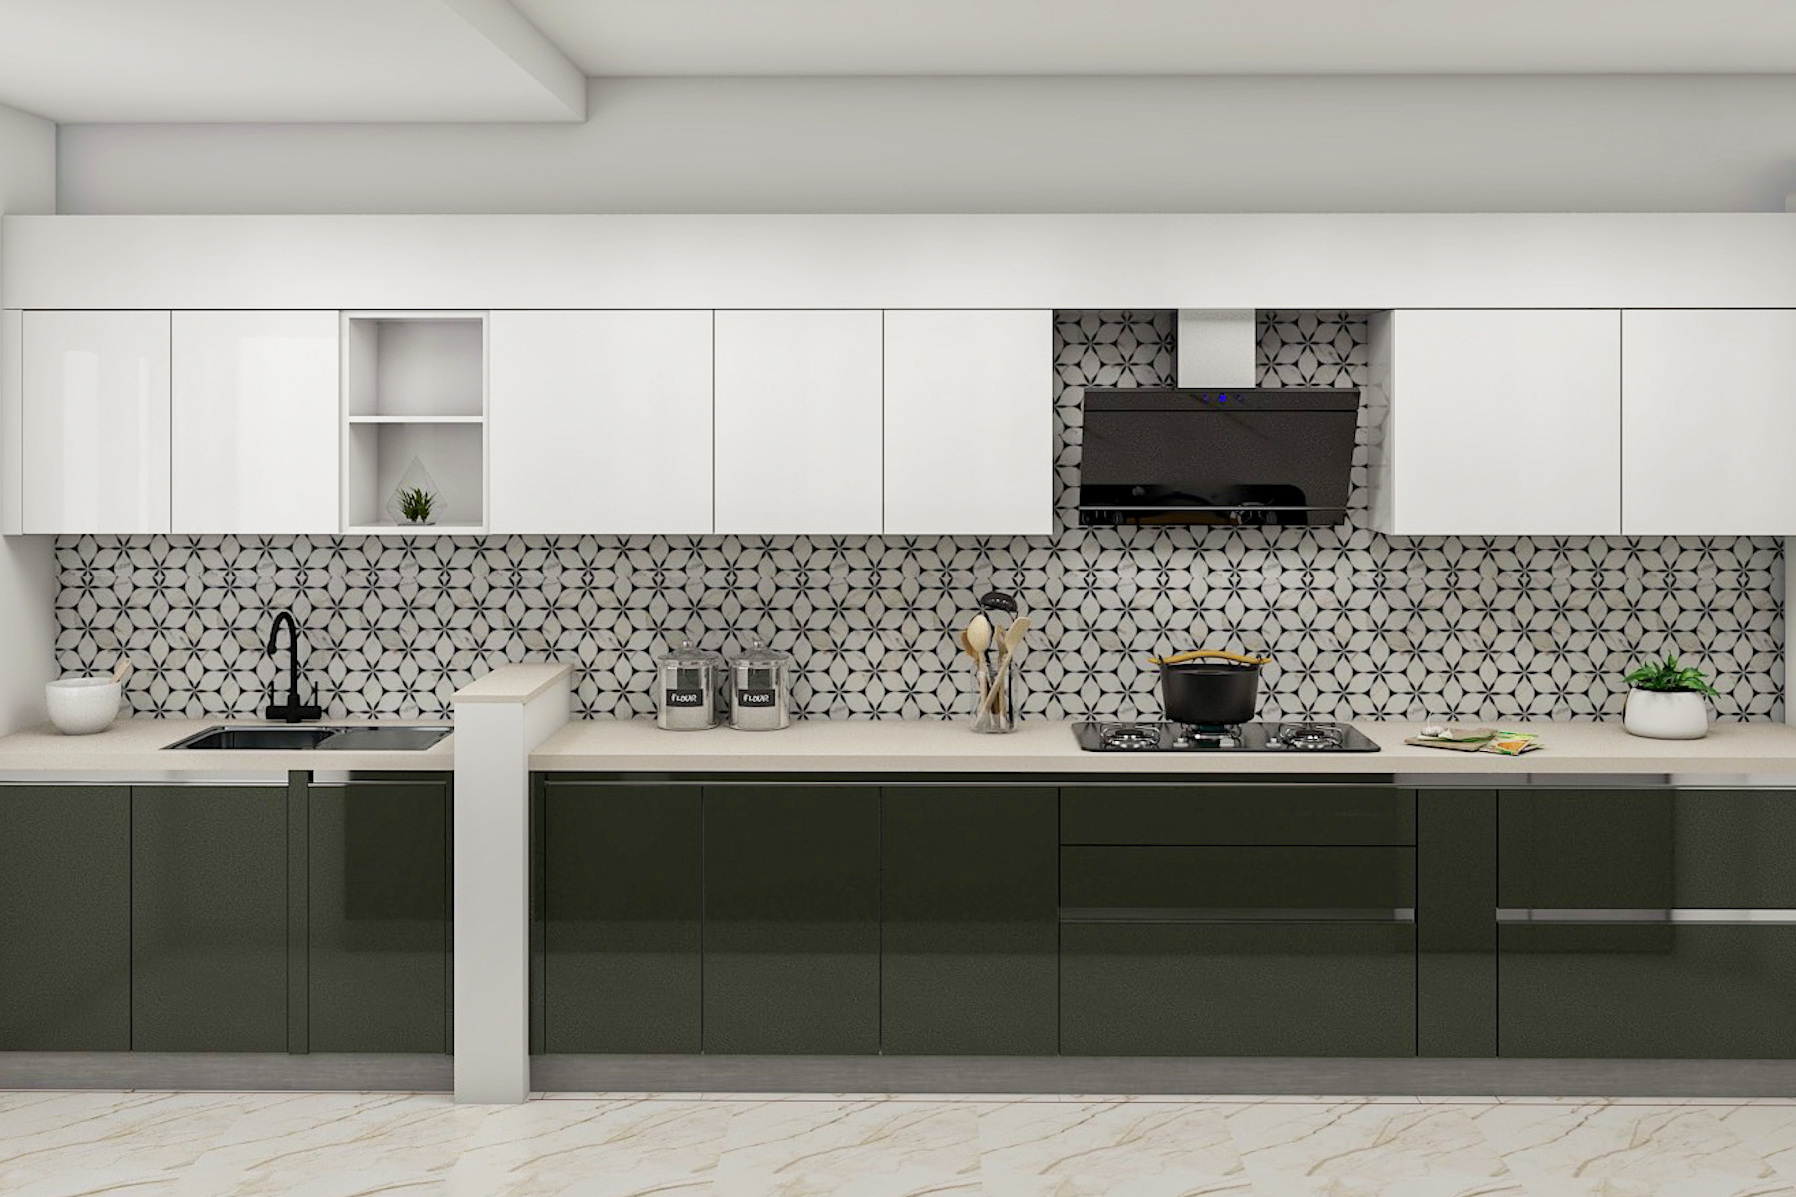 Contemporary Kitchen Design With Patterned Dado Tiles